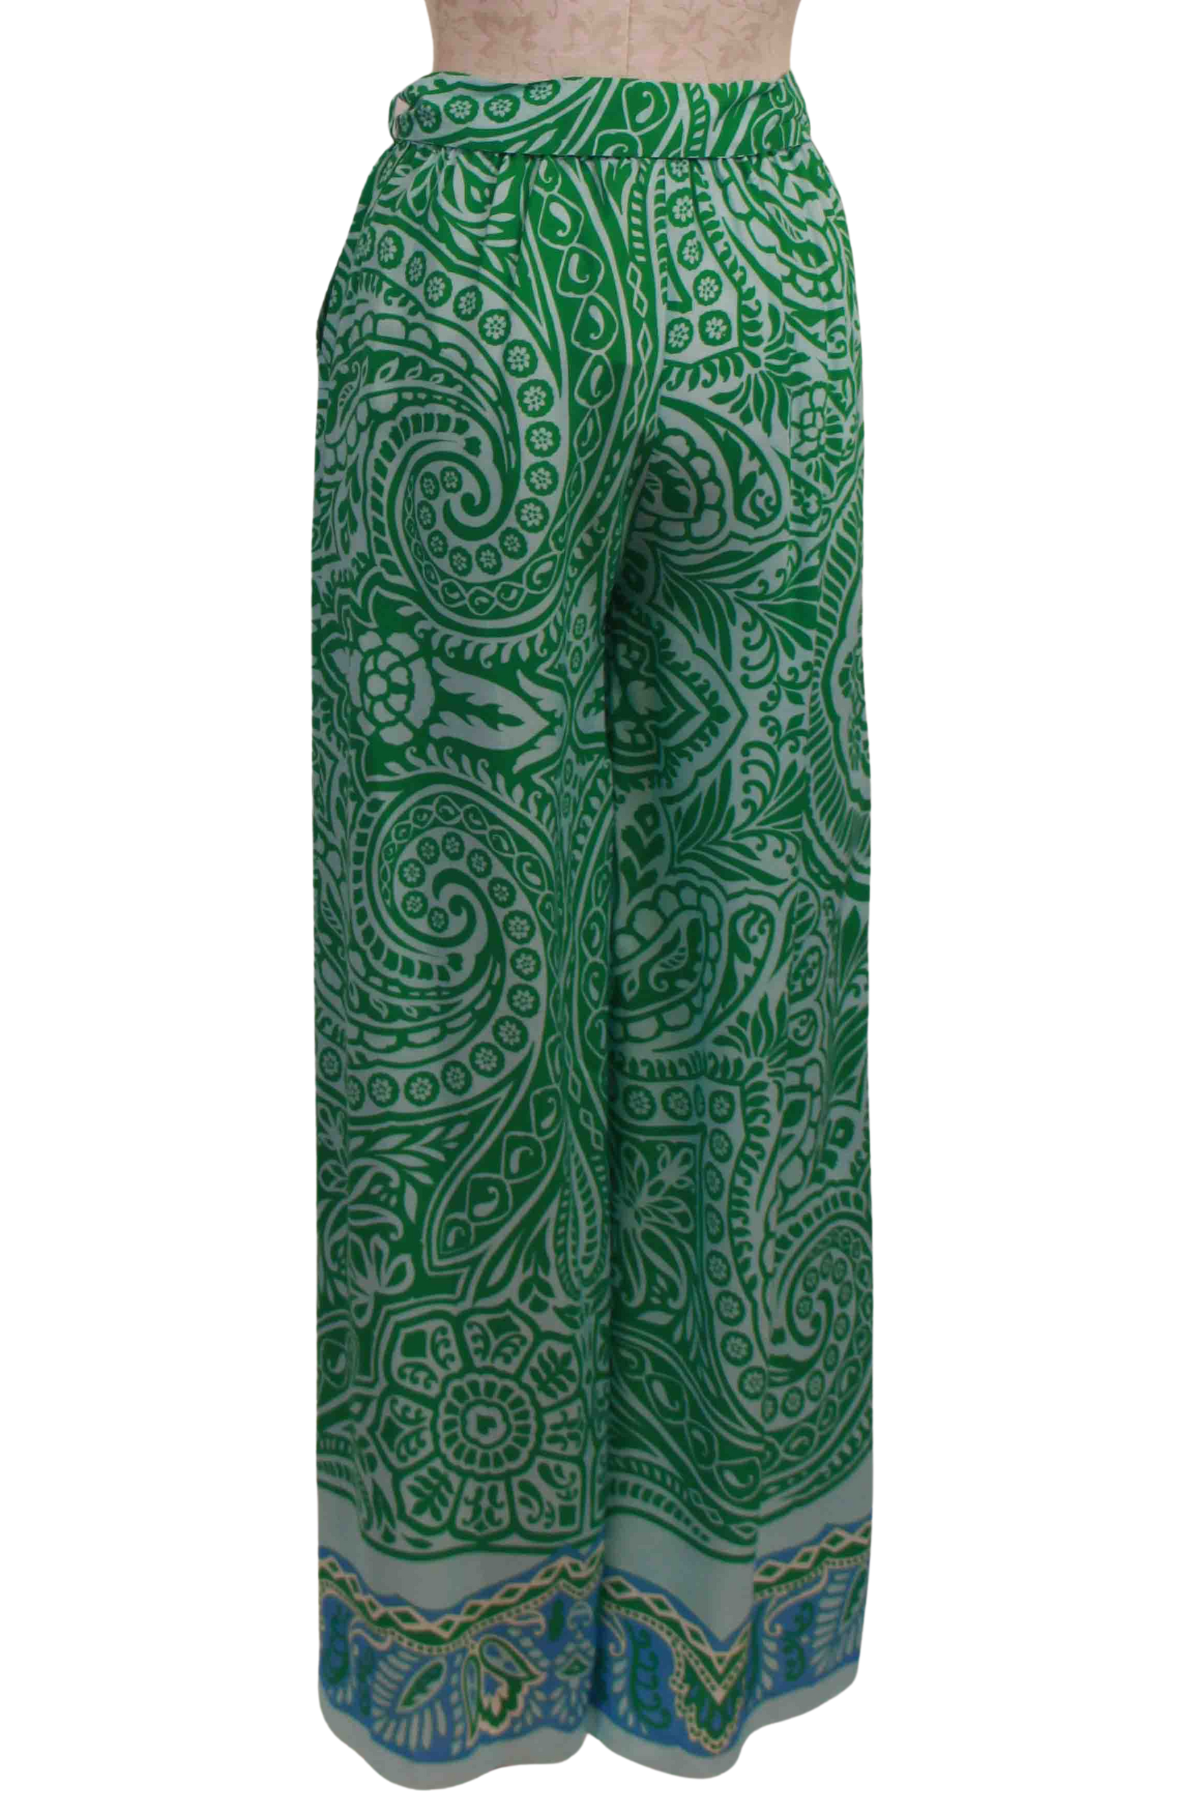 back view of Vert colored Pantera Pant by Valerie Khalfon